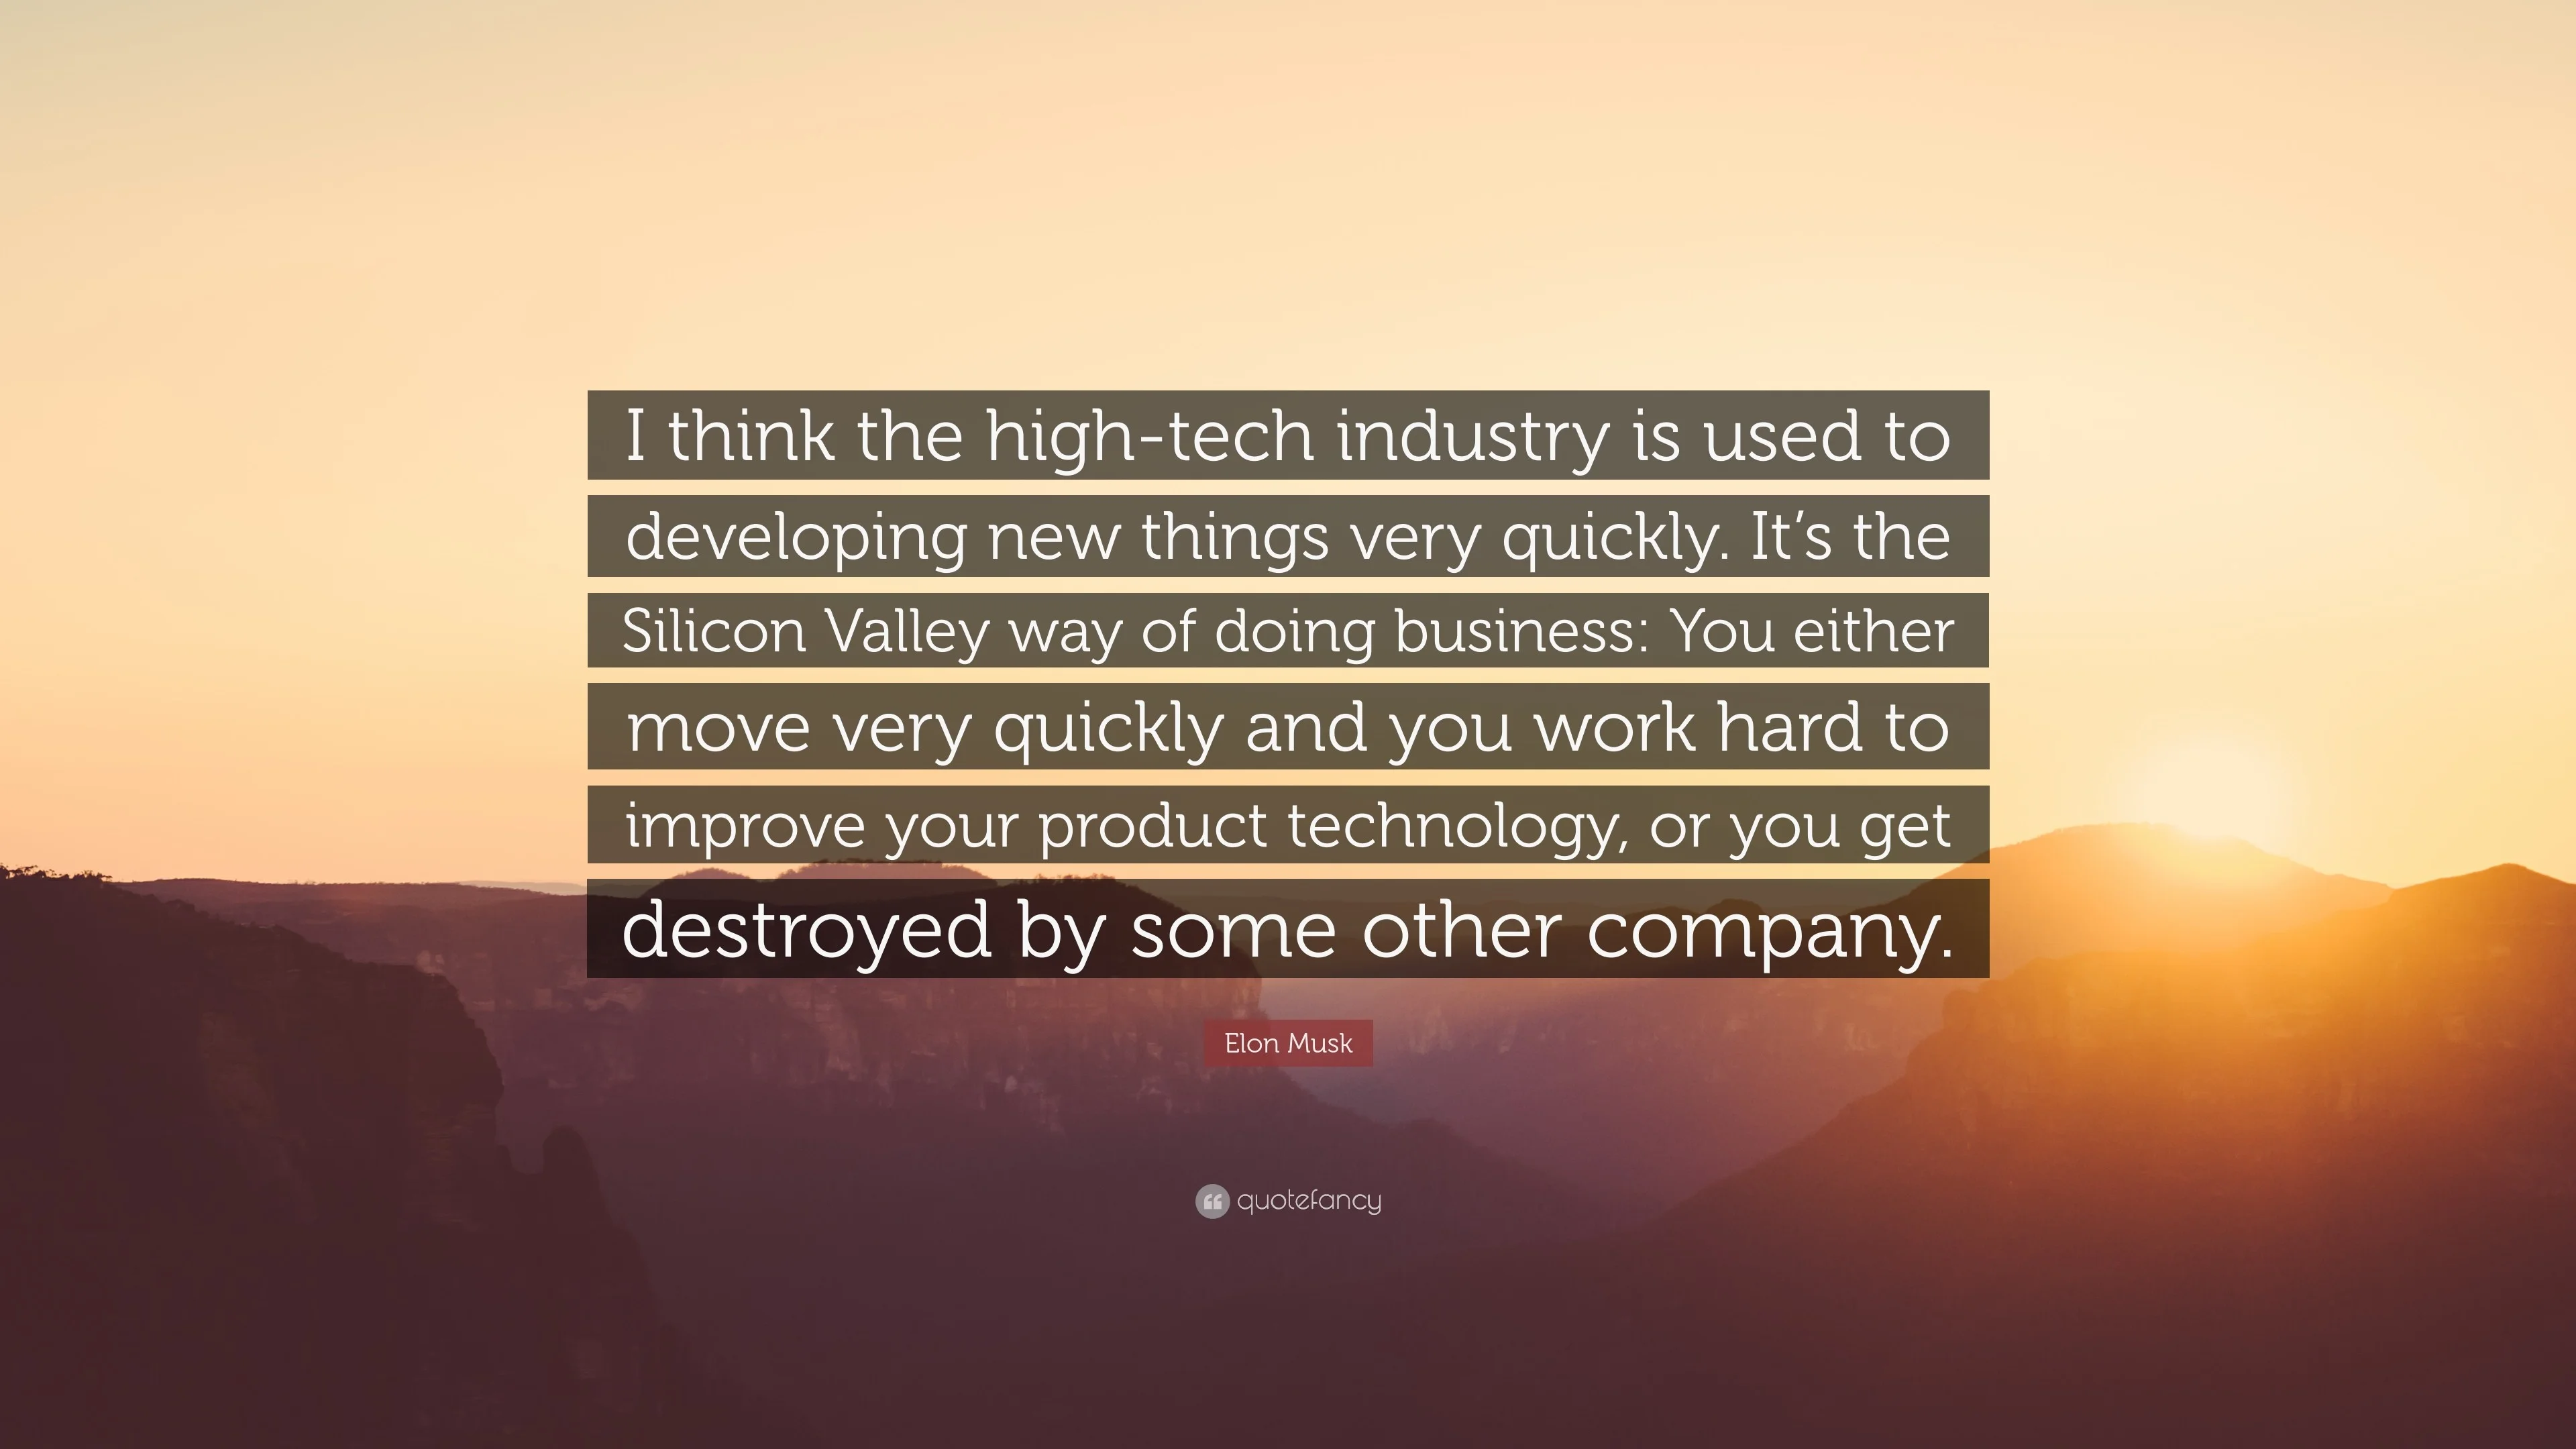 Elon Musk Quote: “I think the high-tech industry is used to developing